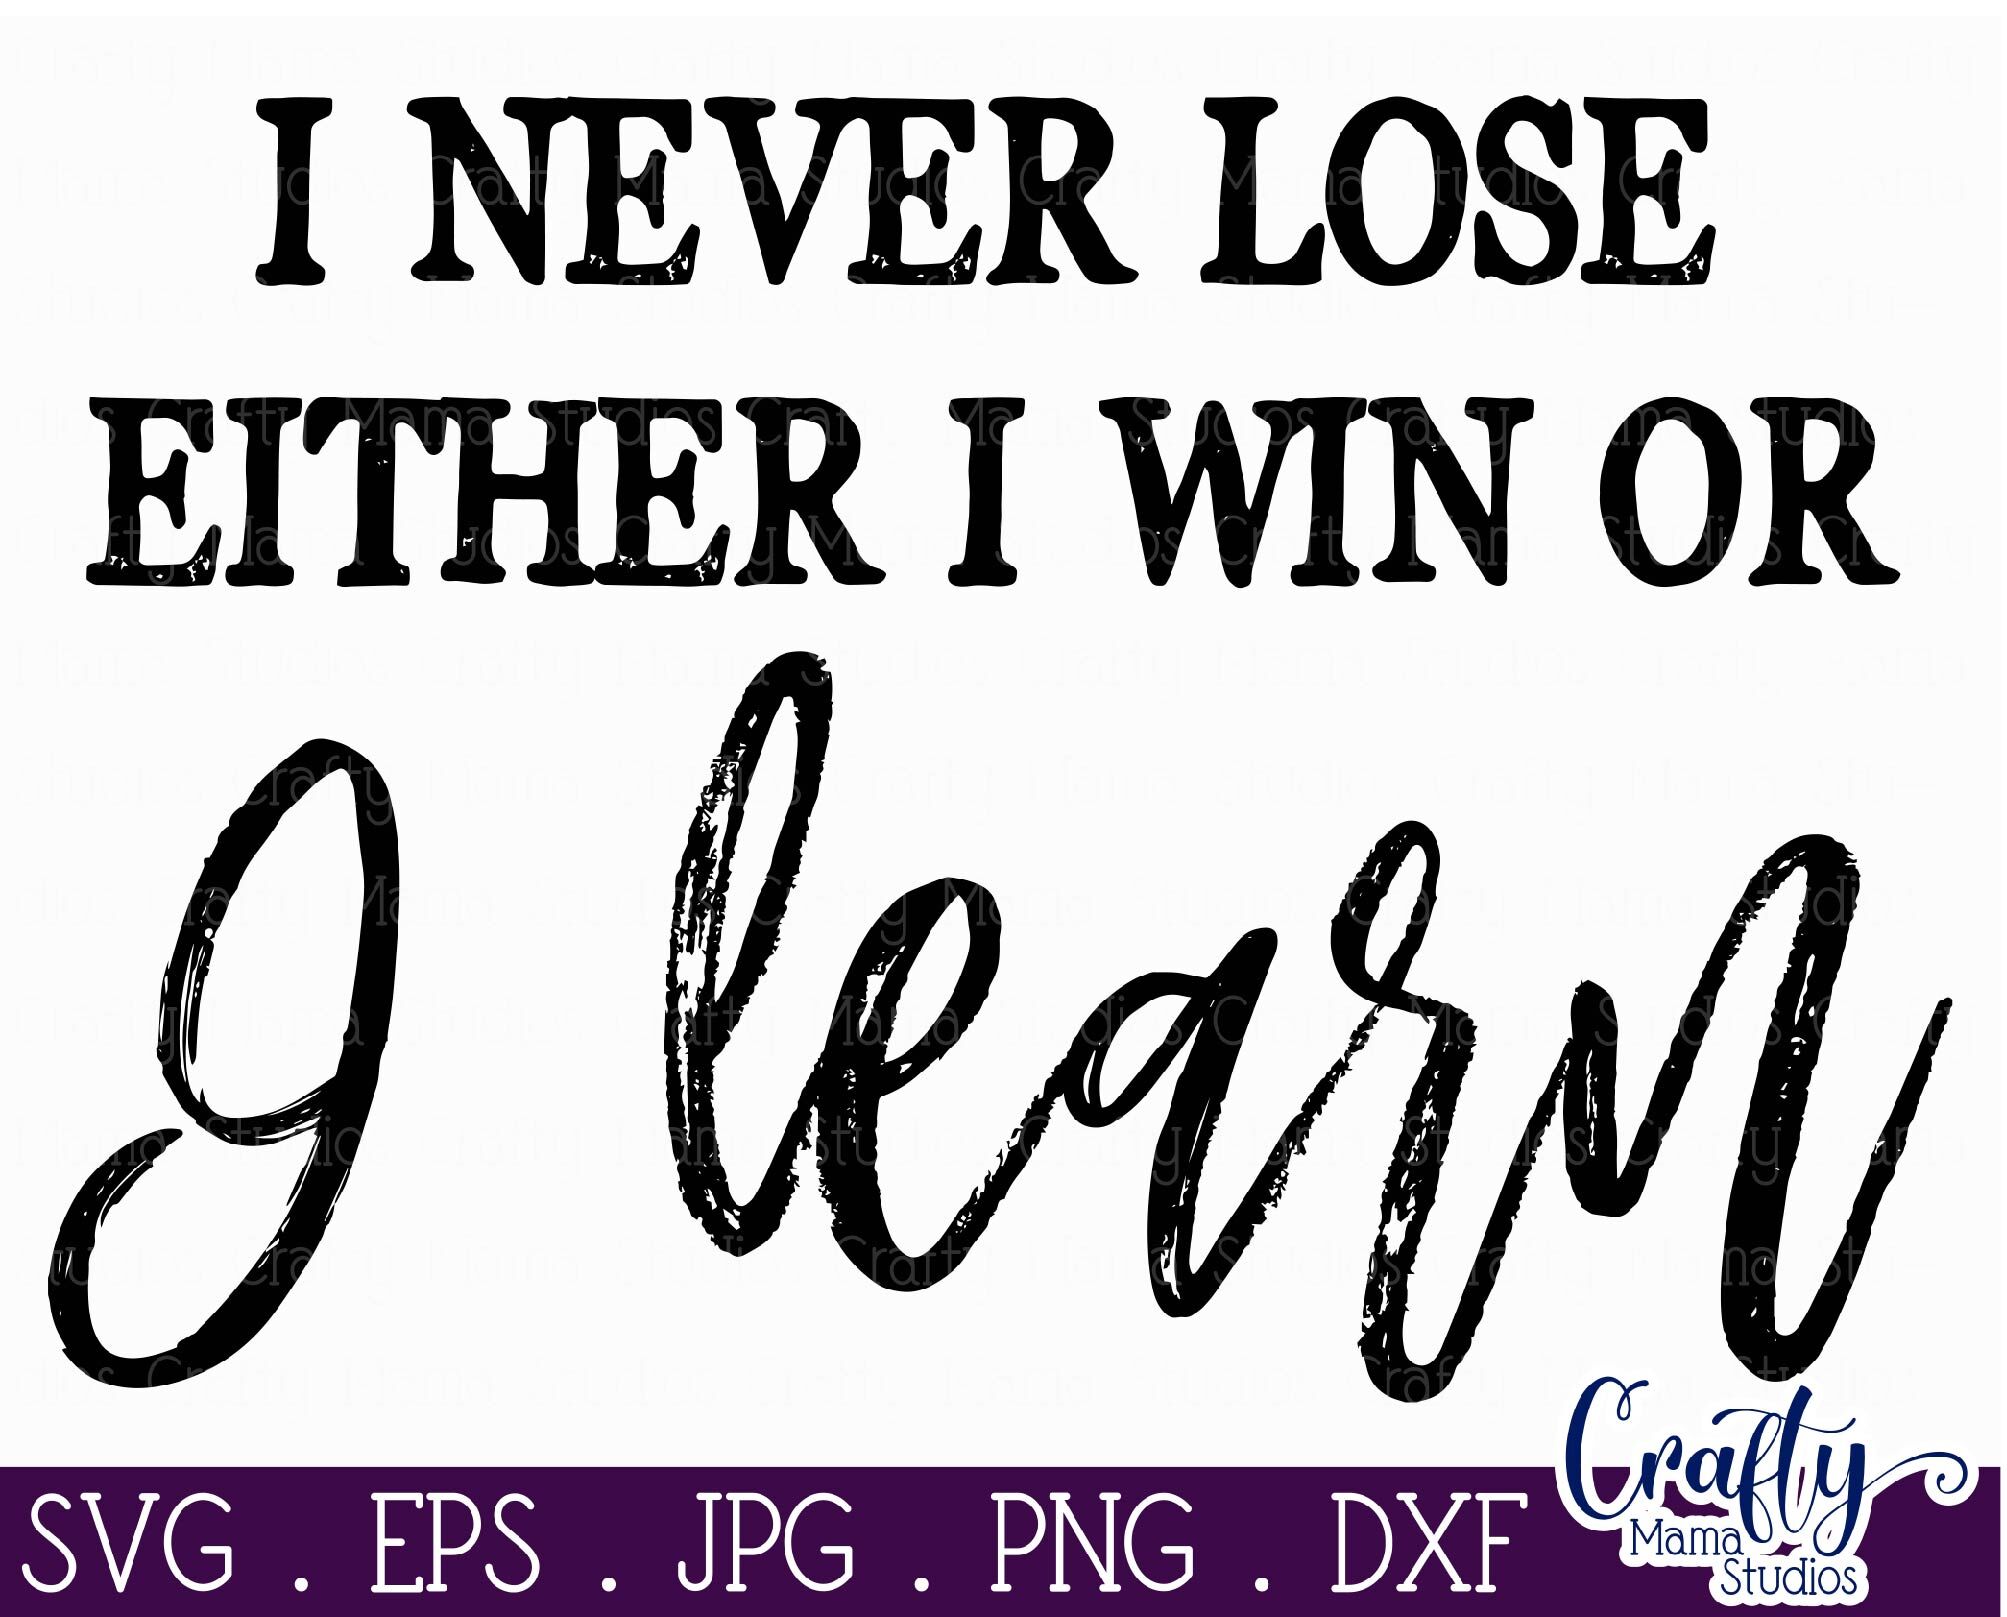 Download Inspirational Svg I Never Lose Svg I Win Or I Learn Svg By Crafty Mama Studios Thehungryjpeg Com